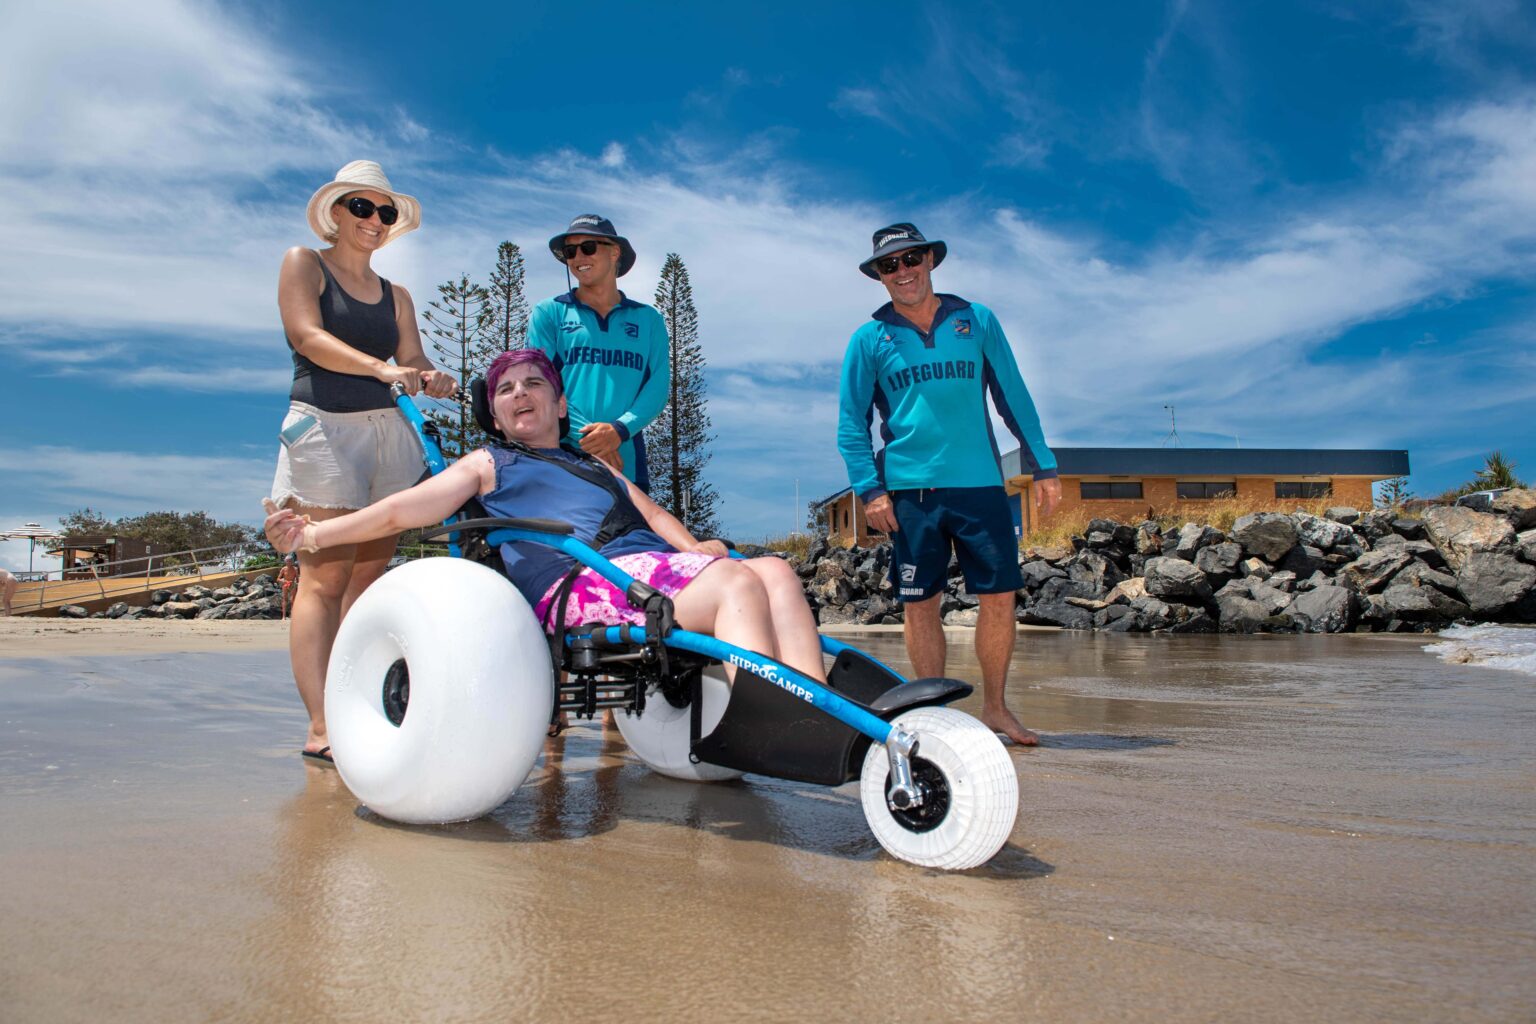 Jetty Beach is ideal for those accessibility needs